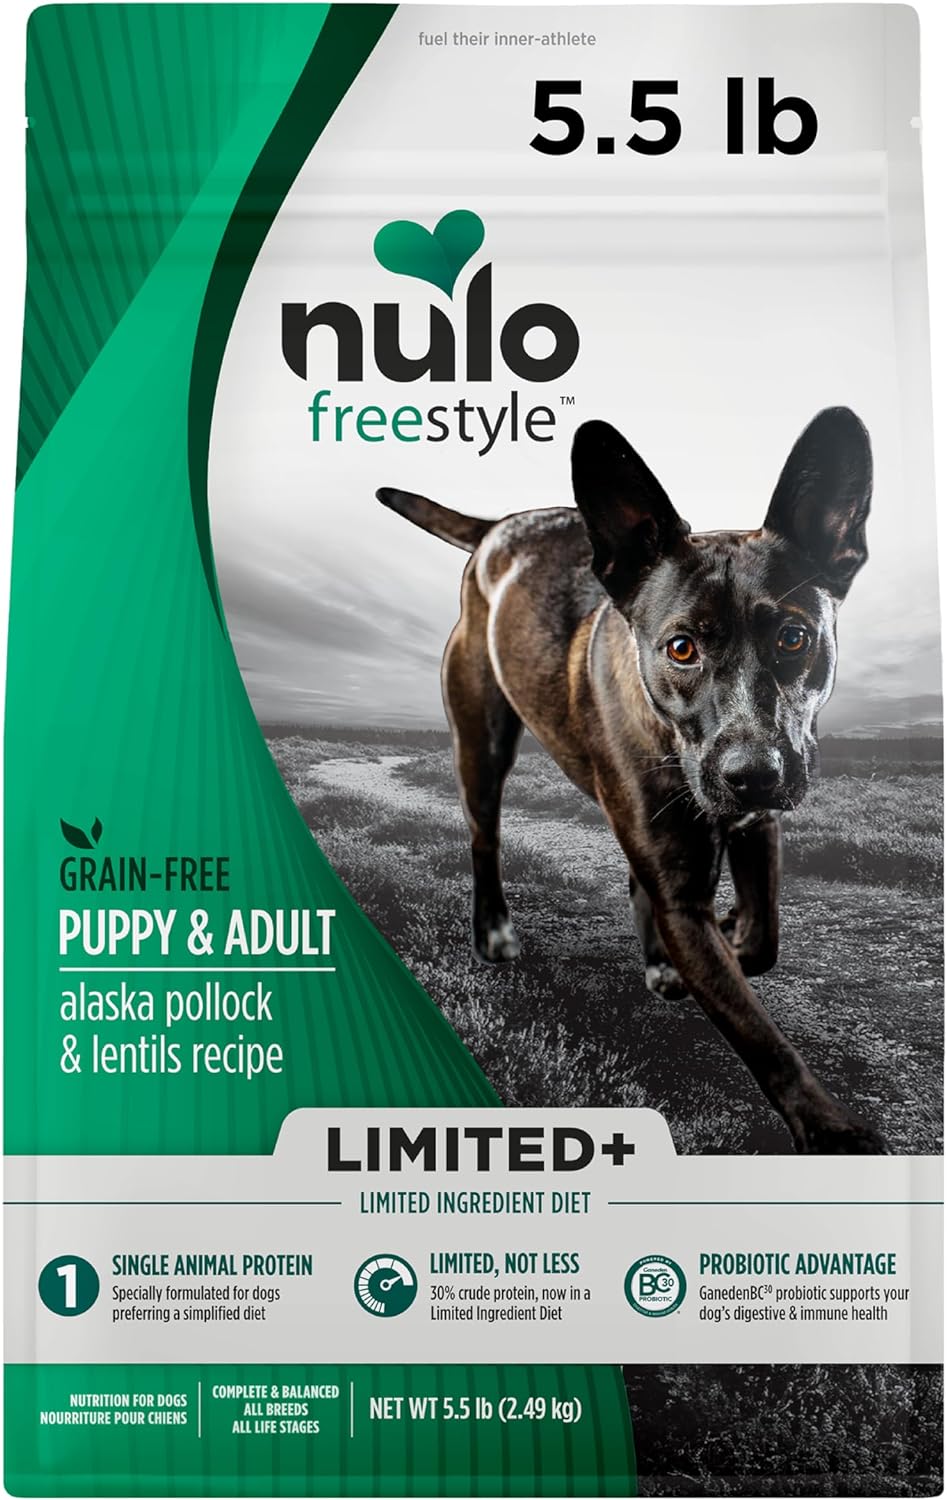 Nulo Freestyle All Breed Dog Food, Premium Allergy Friendly Adult & Puppy Grain-Free Dry Kibble Dog Food, Single Animal Protein with BC30 Probiotic for Healthy Digestive Support